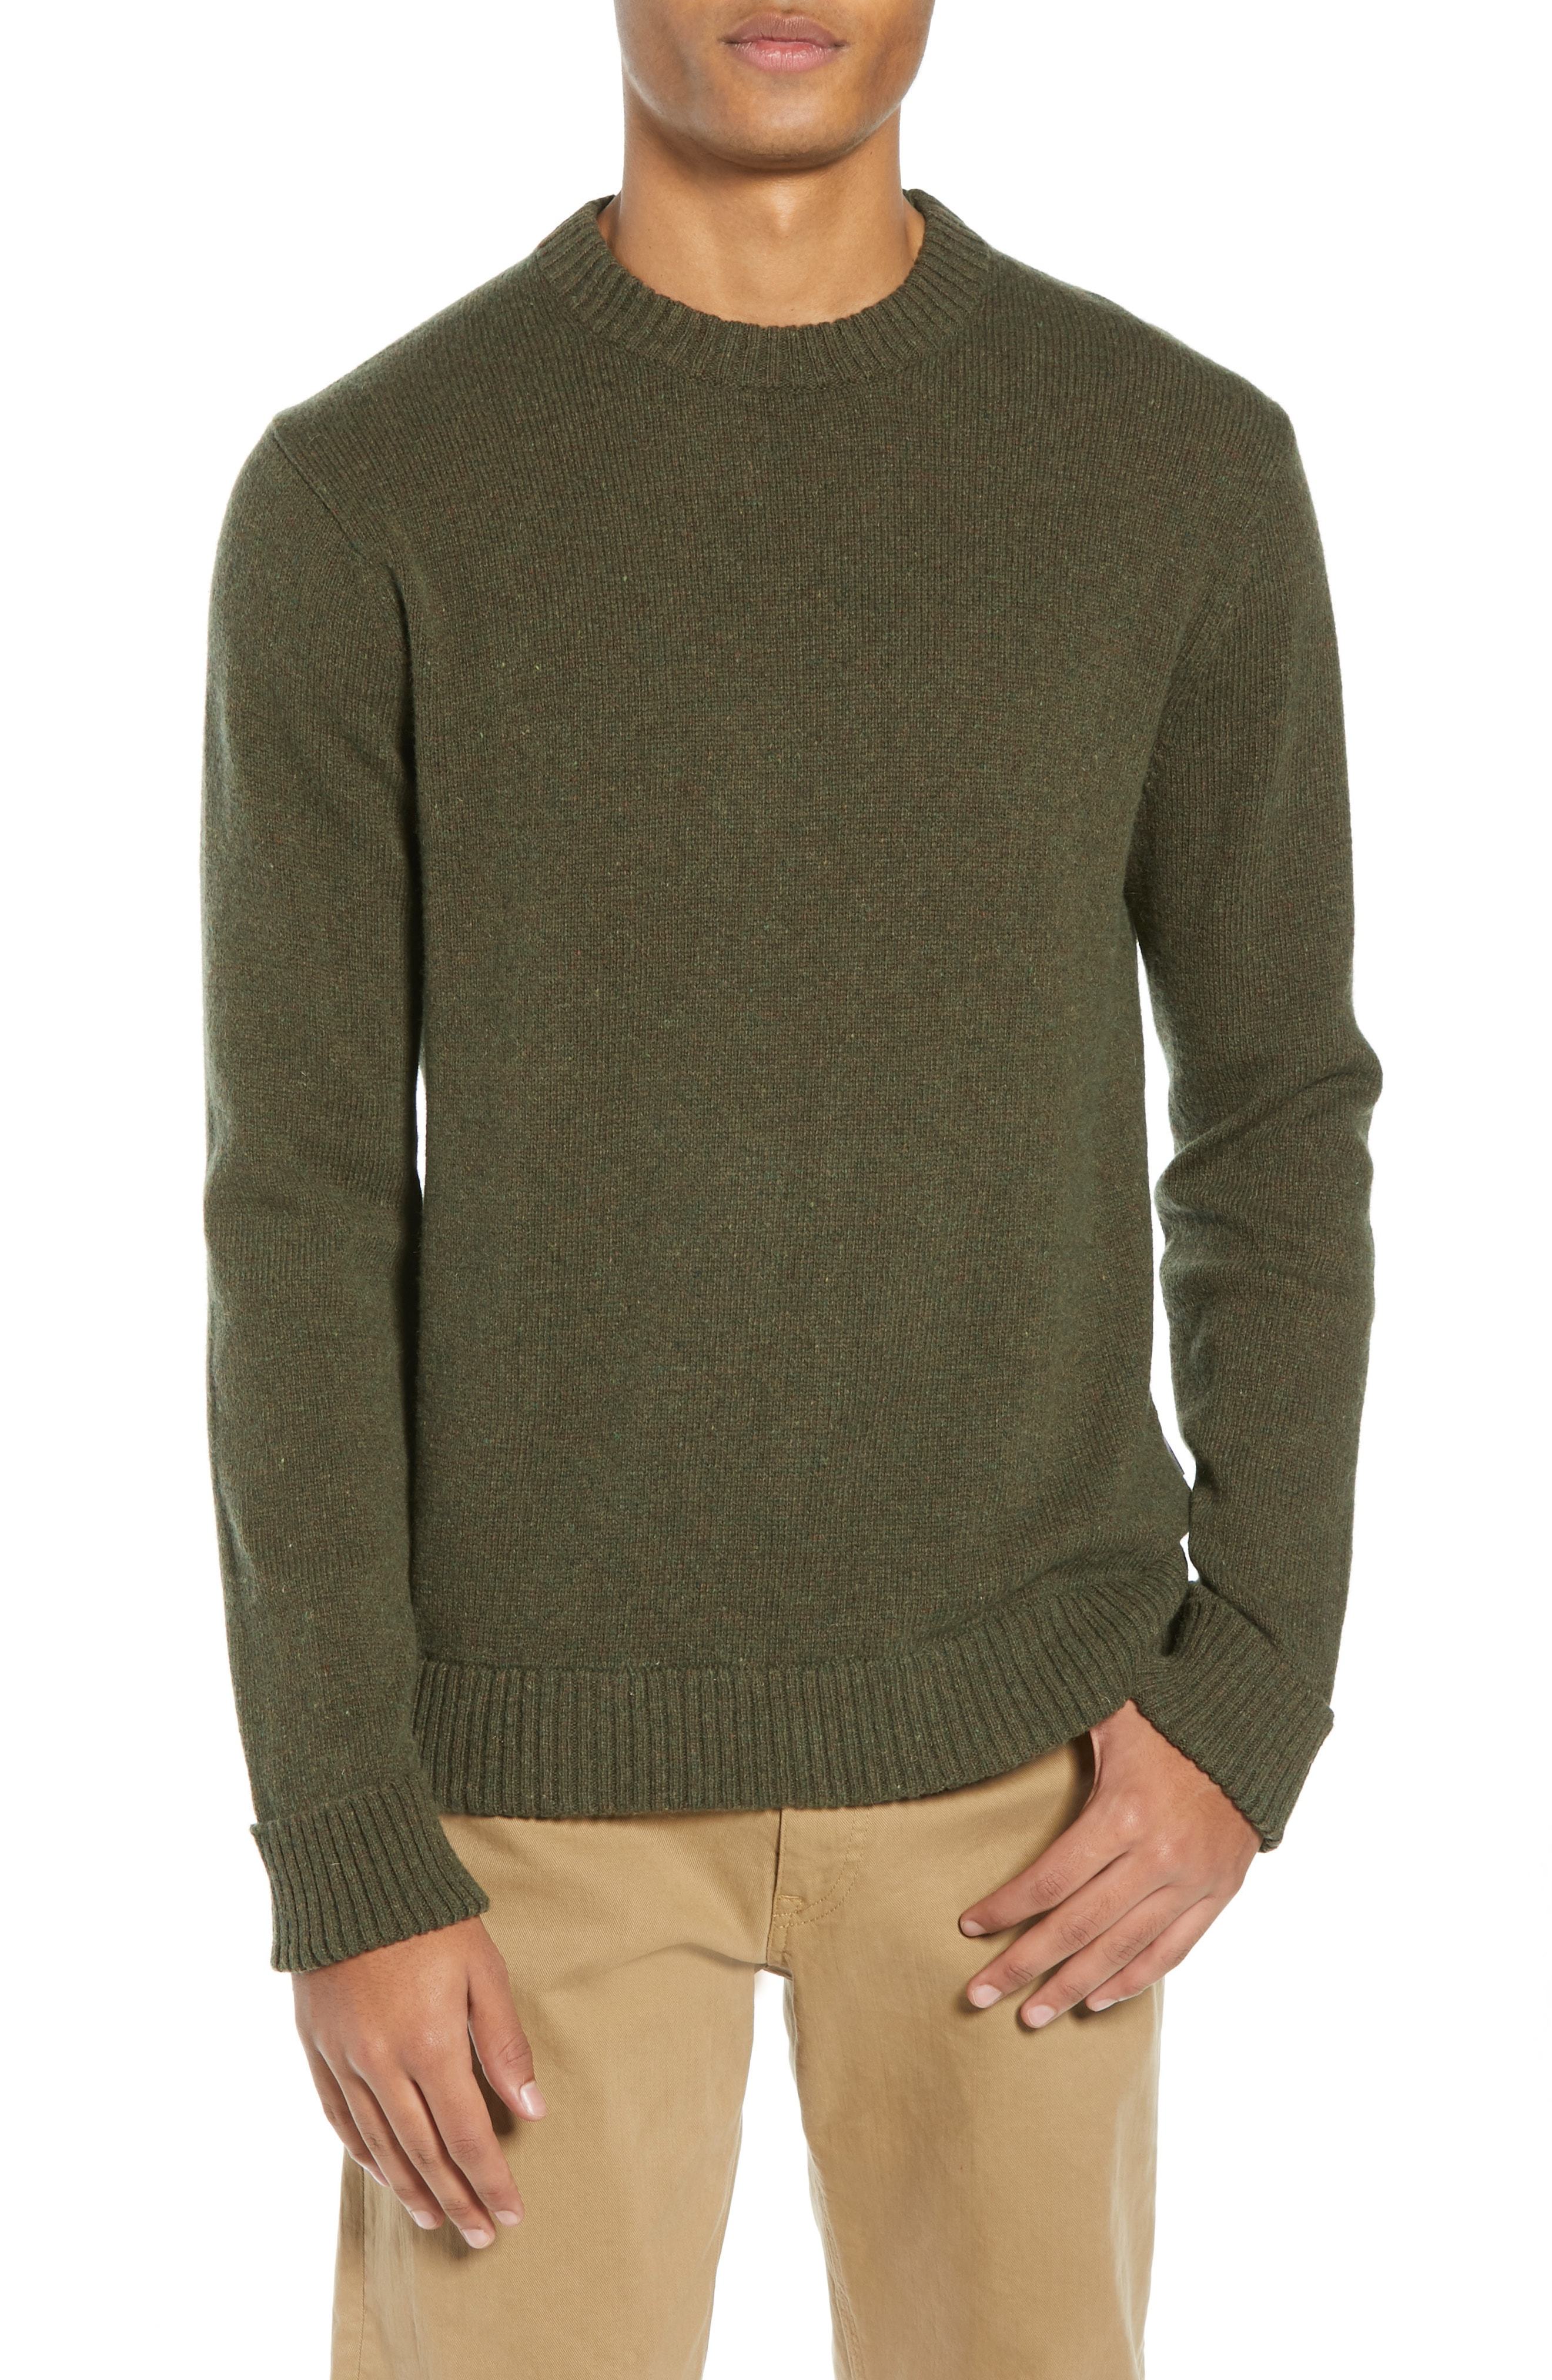 Patagonia Recycled Wool Blend Sweater, $64 | Nordstrom | Lookastic.com